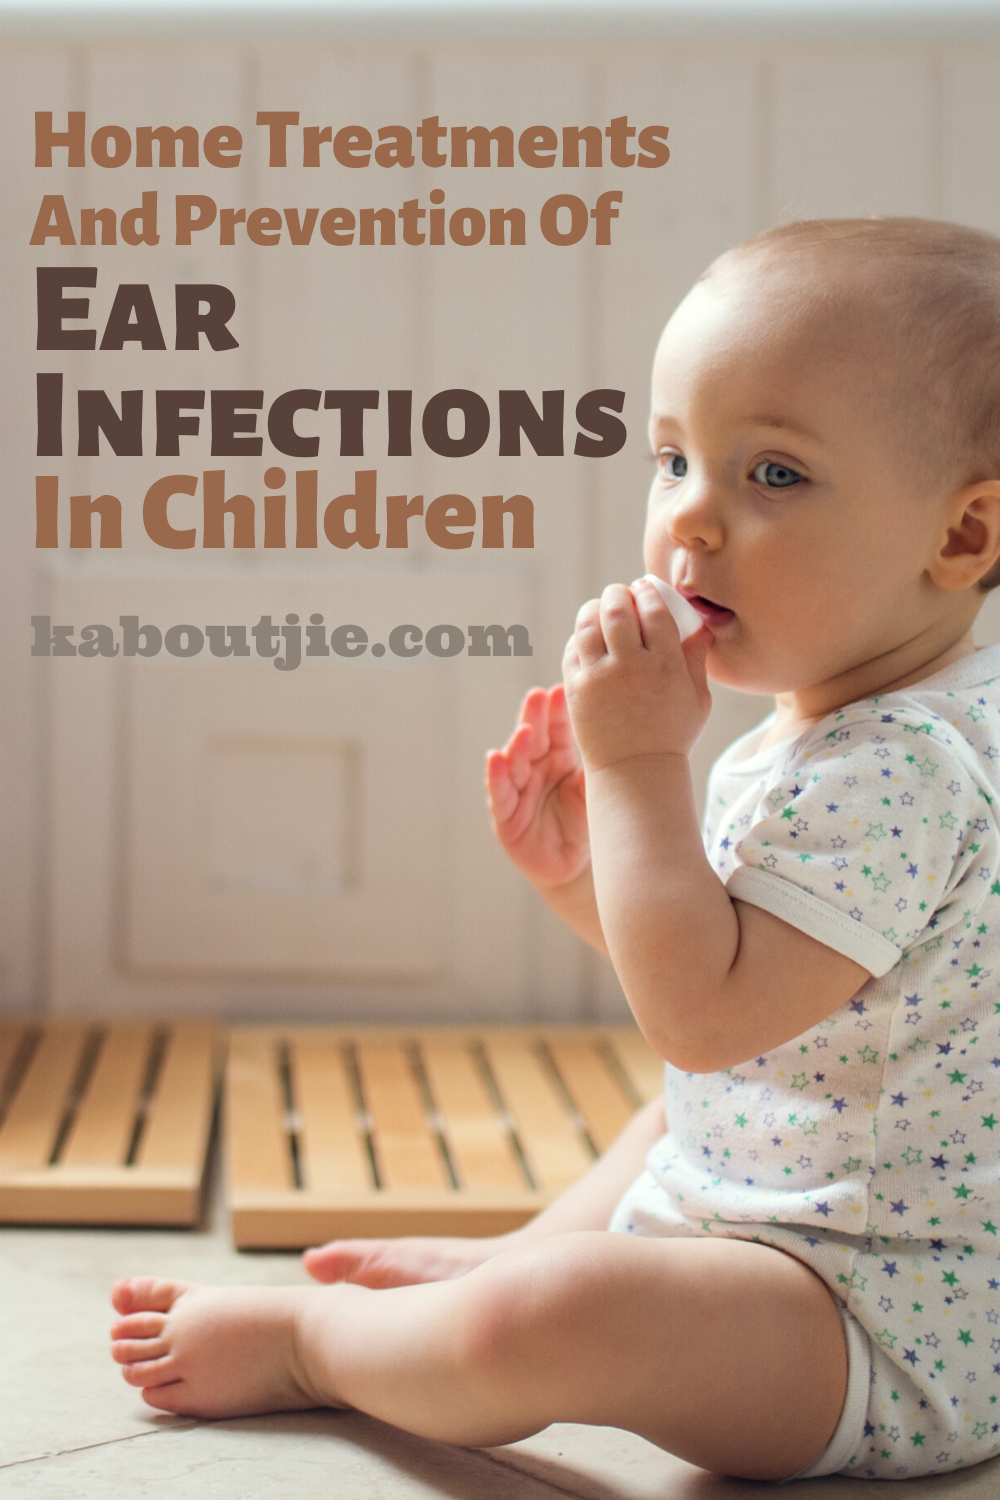 Home Treatments And Prevention Of Ear Infections In ...